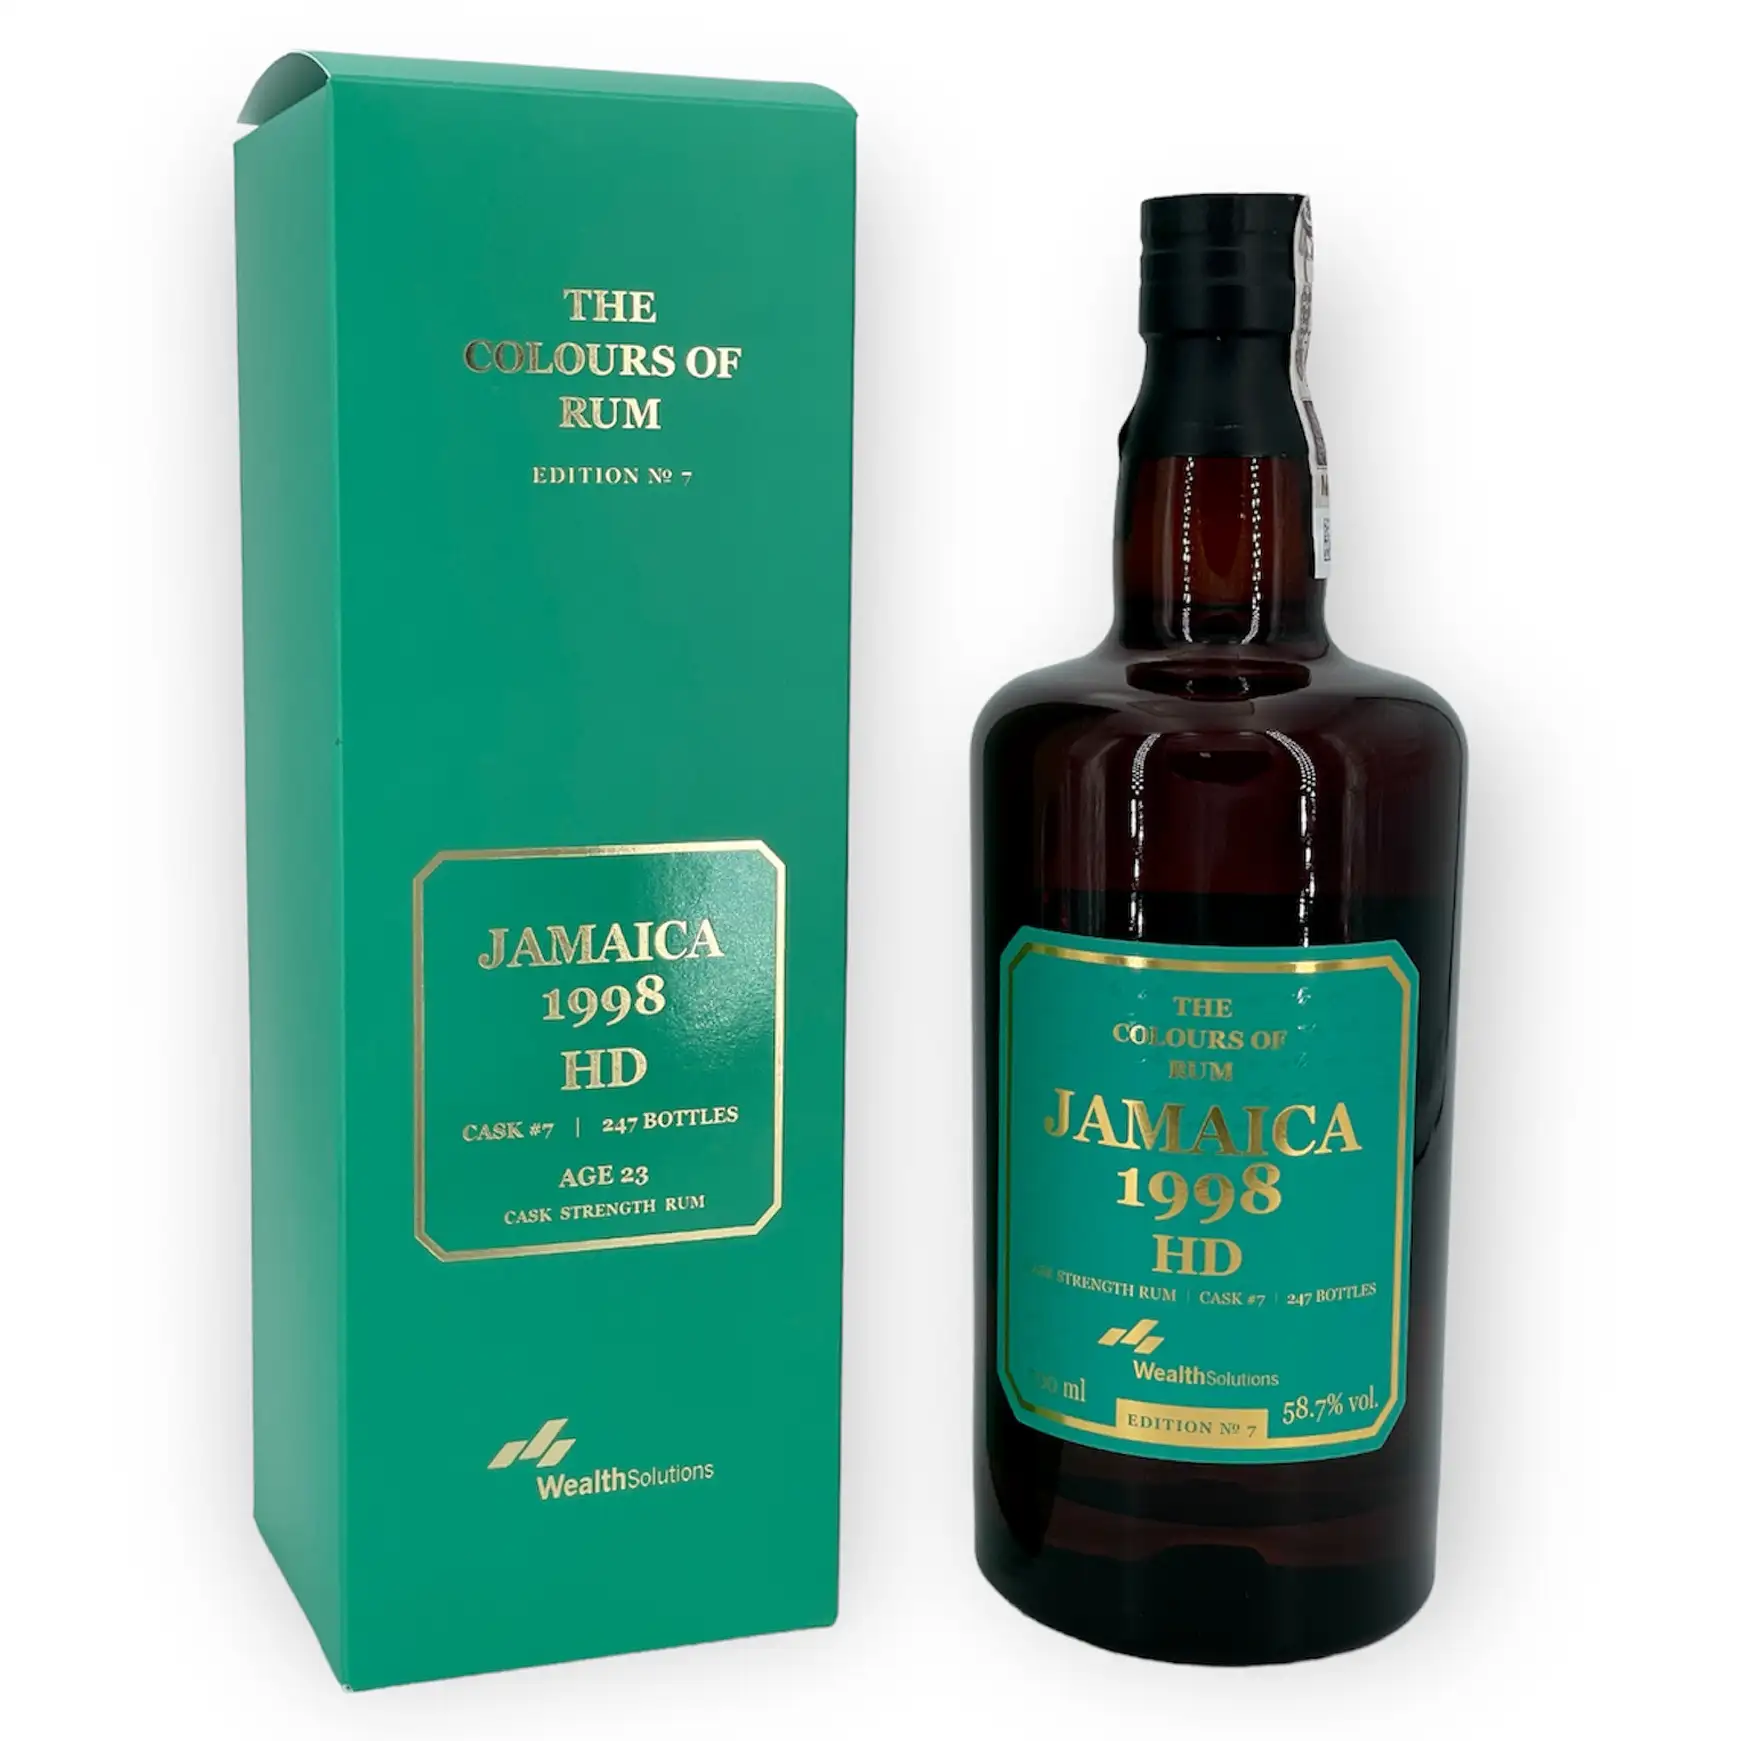 Image of the front of the bottle of the rum Jamaica No. 7 HLCF